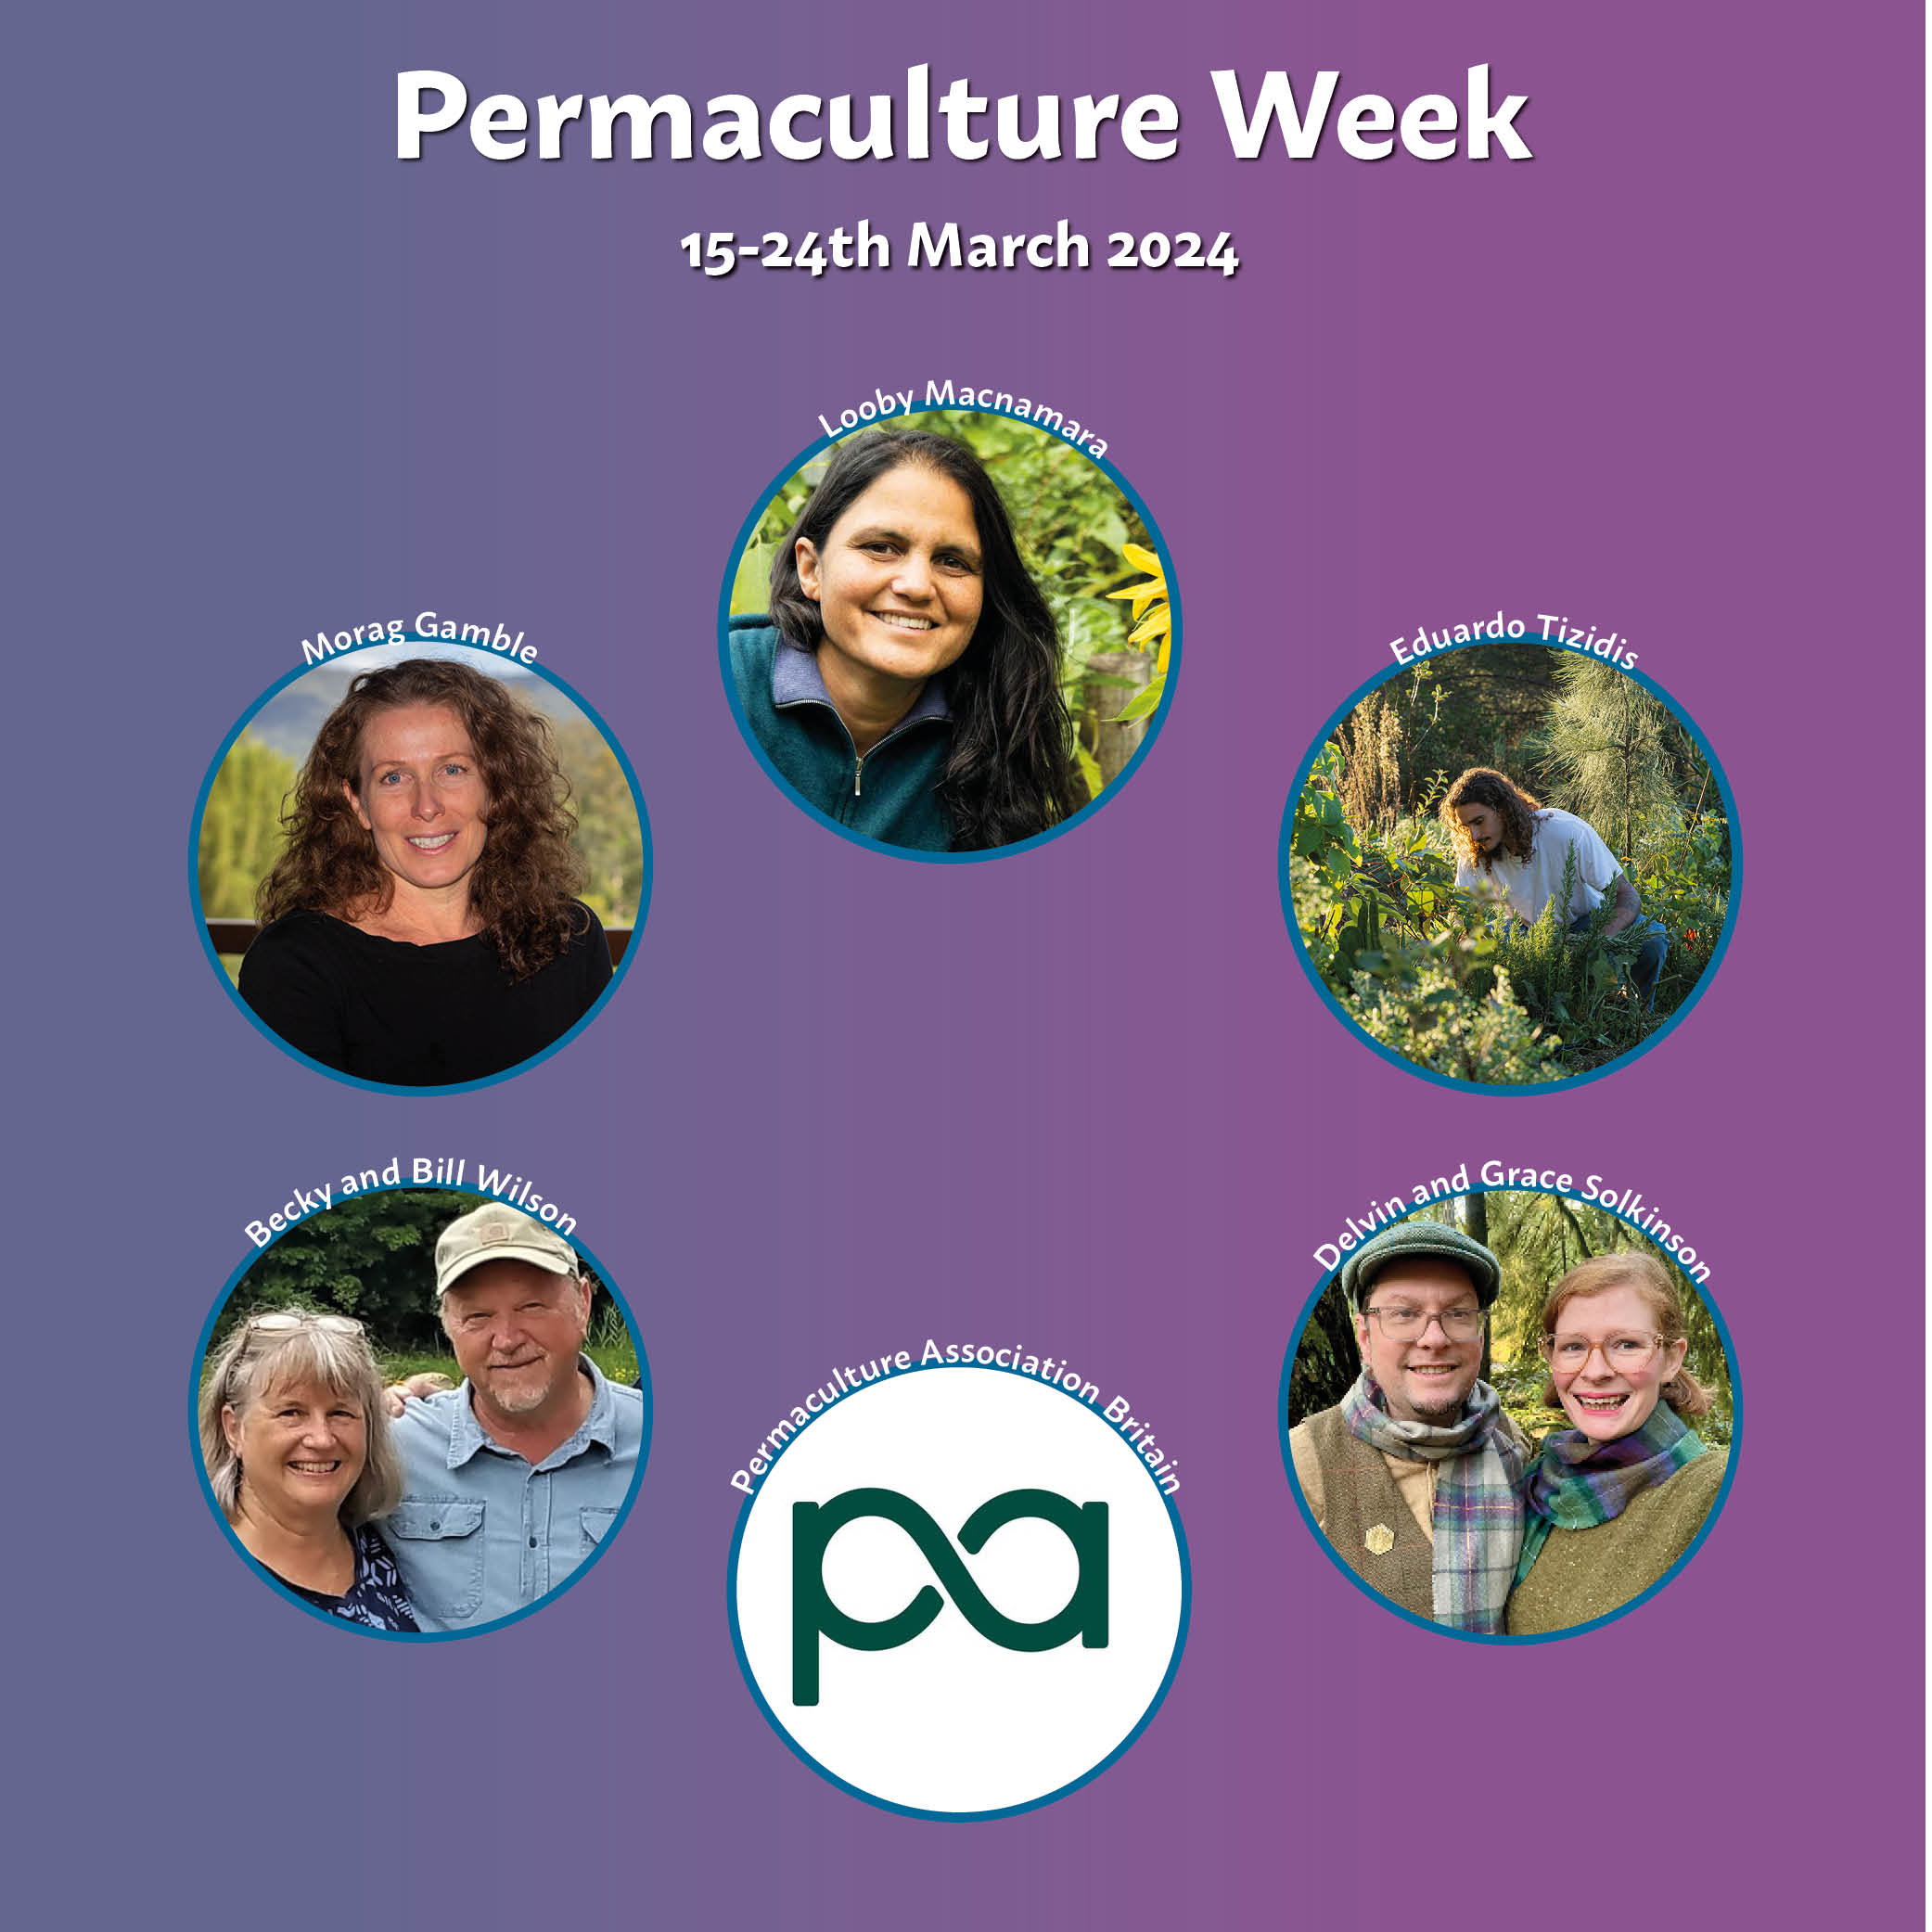 Don’t Miss Permaculture Week: 15-24th March